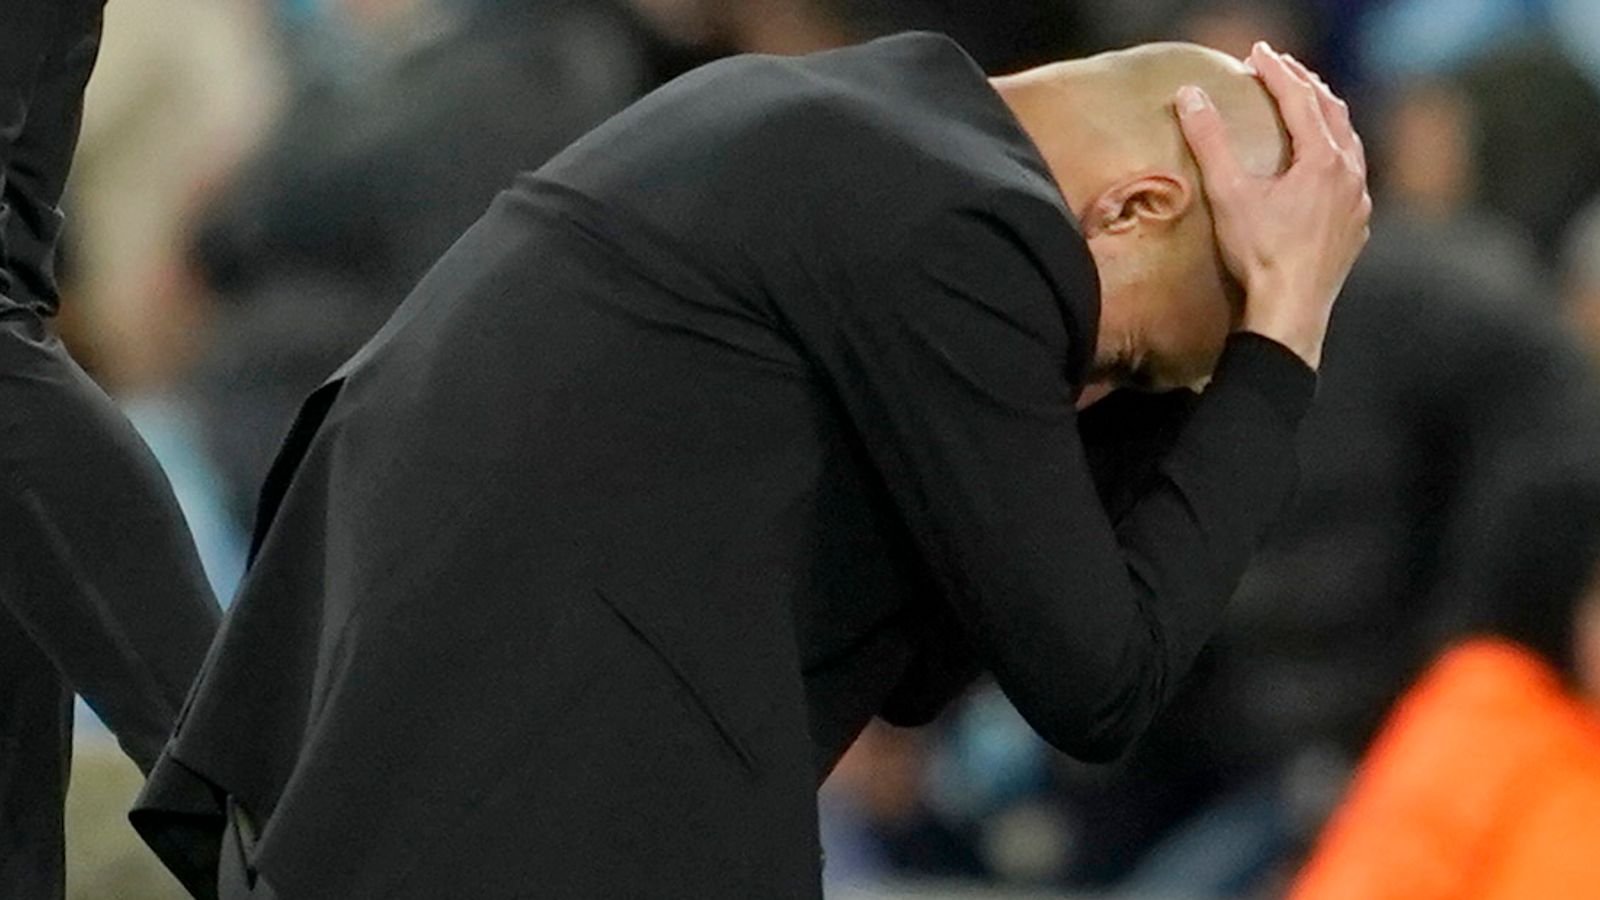 Man City knocked out of the Champions League: Real Madrid's Jude Bellingham enjoys 'beautiful' win as Pep Guardiola rues missed chances